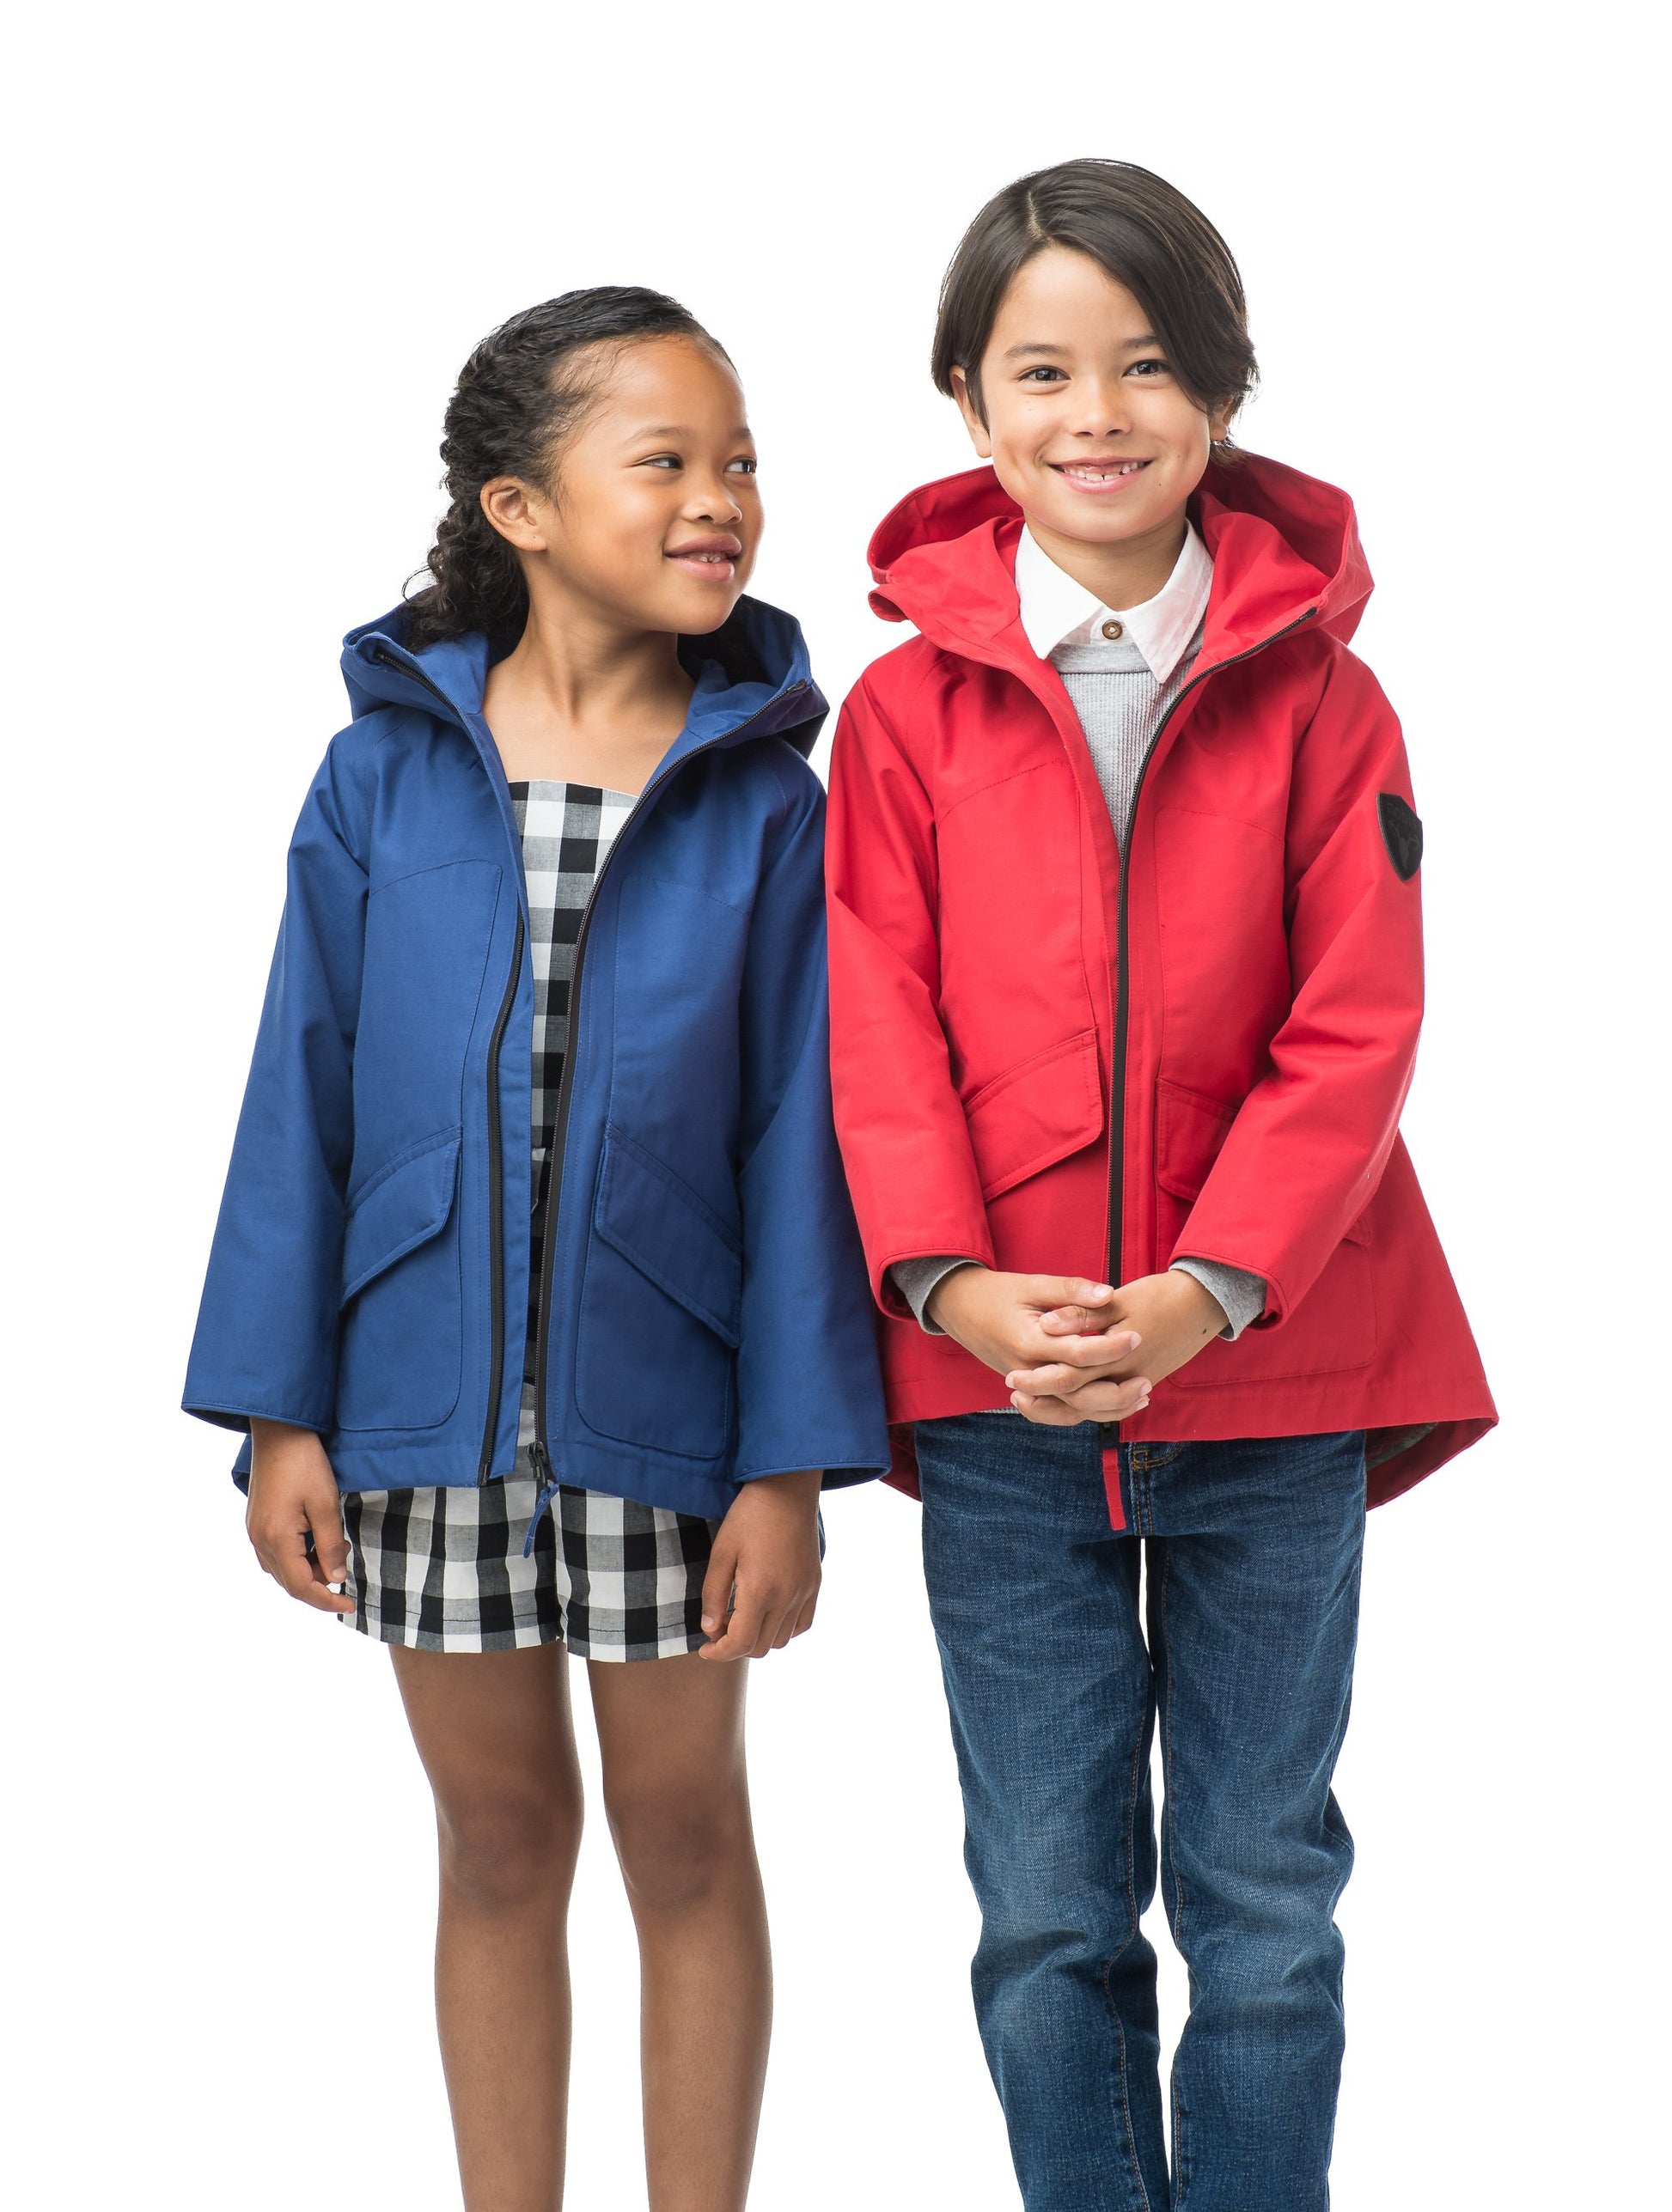 Kid's hip length fishtail rain jacket with hood in Royal, or Red